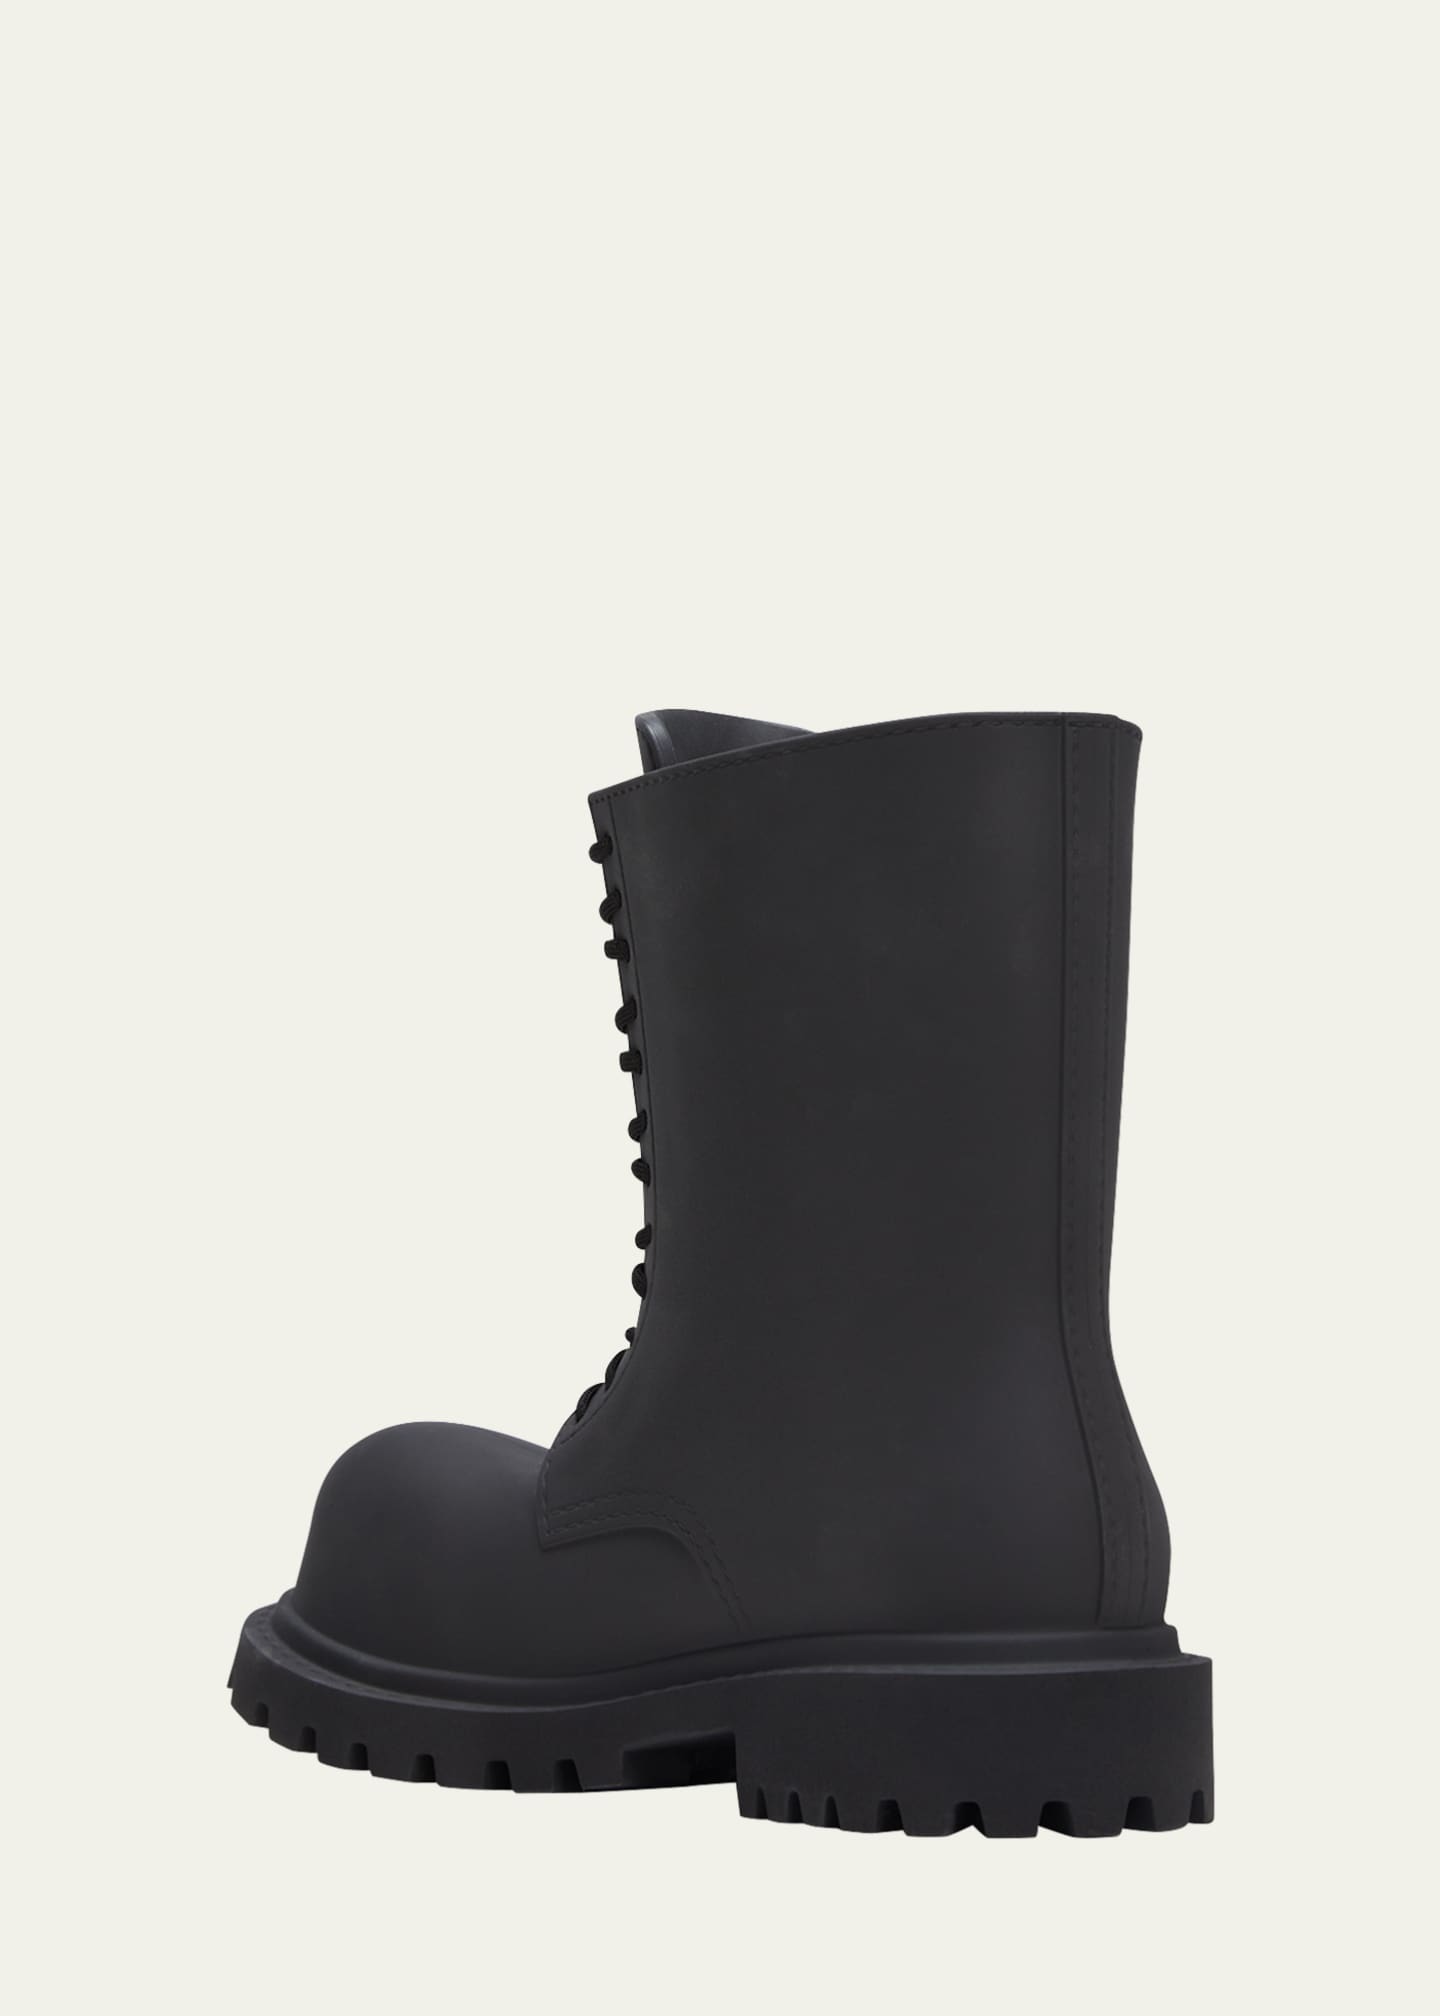 Usikker Monumental bryst Balenciaga Men's Oversized Leather Army Boots - Bergdorf Goodman